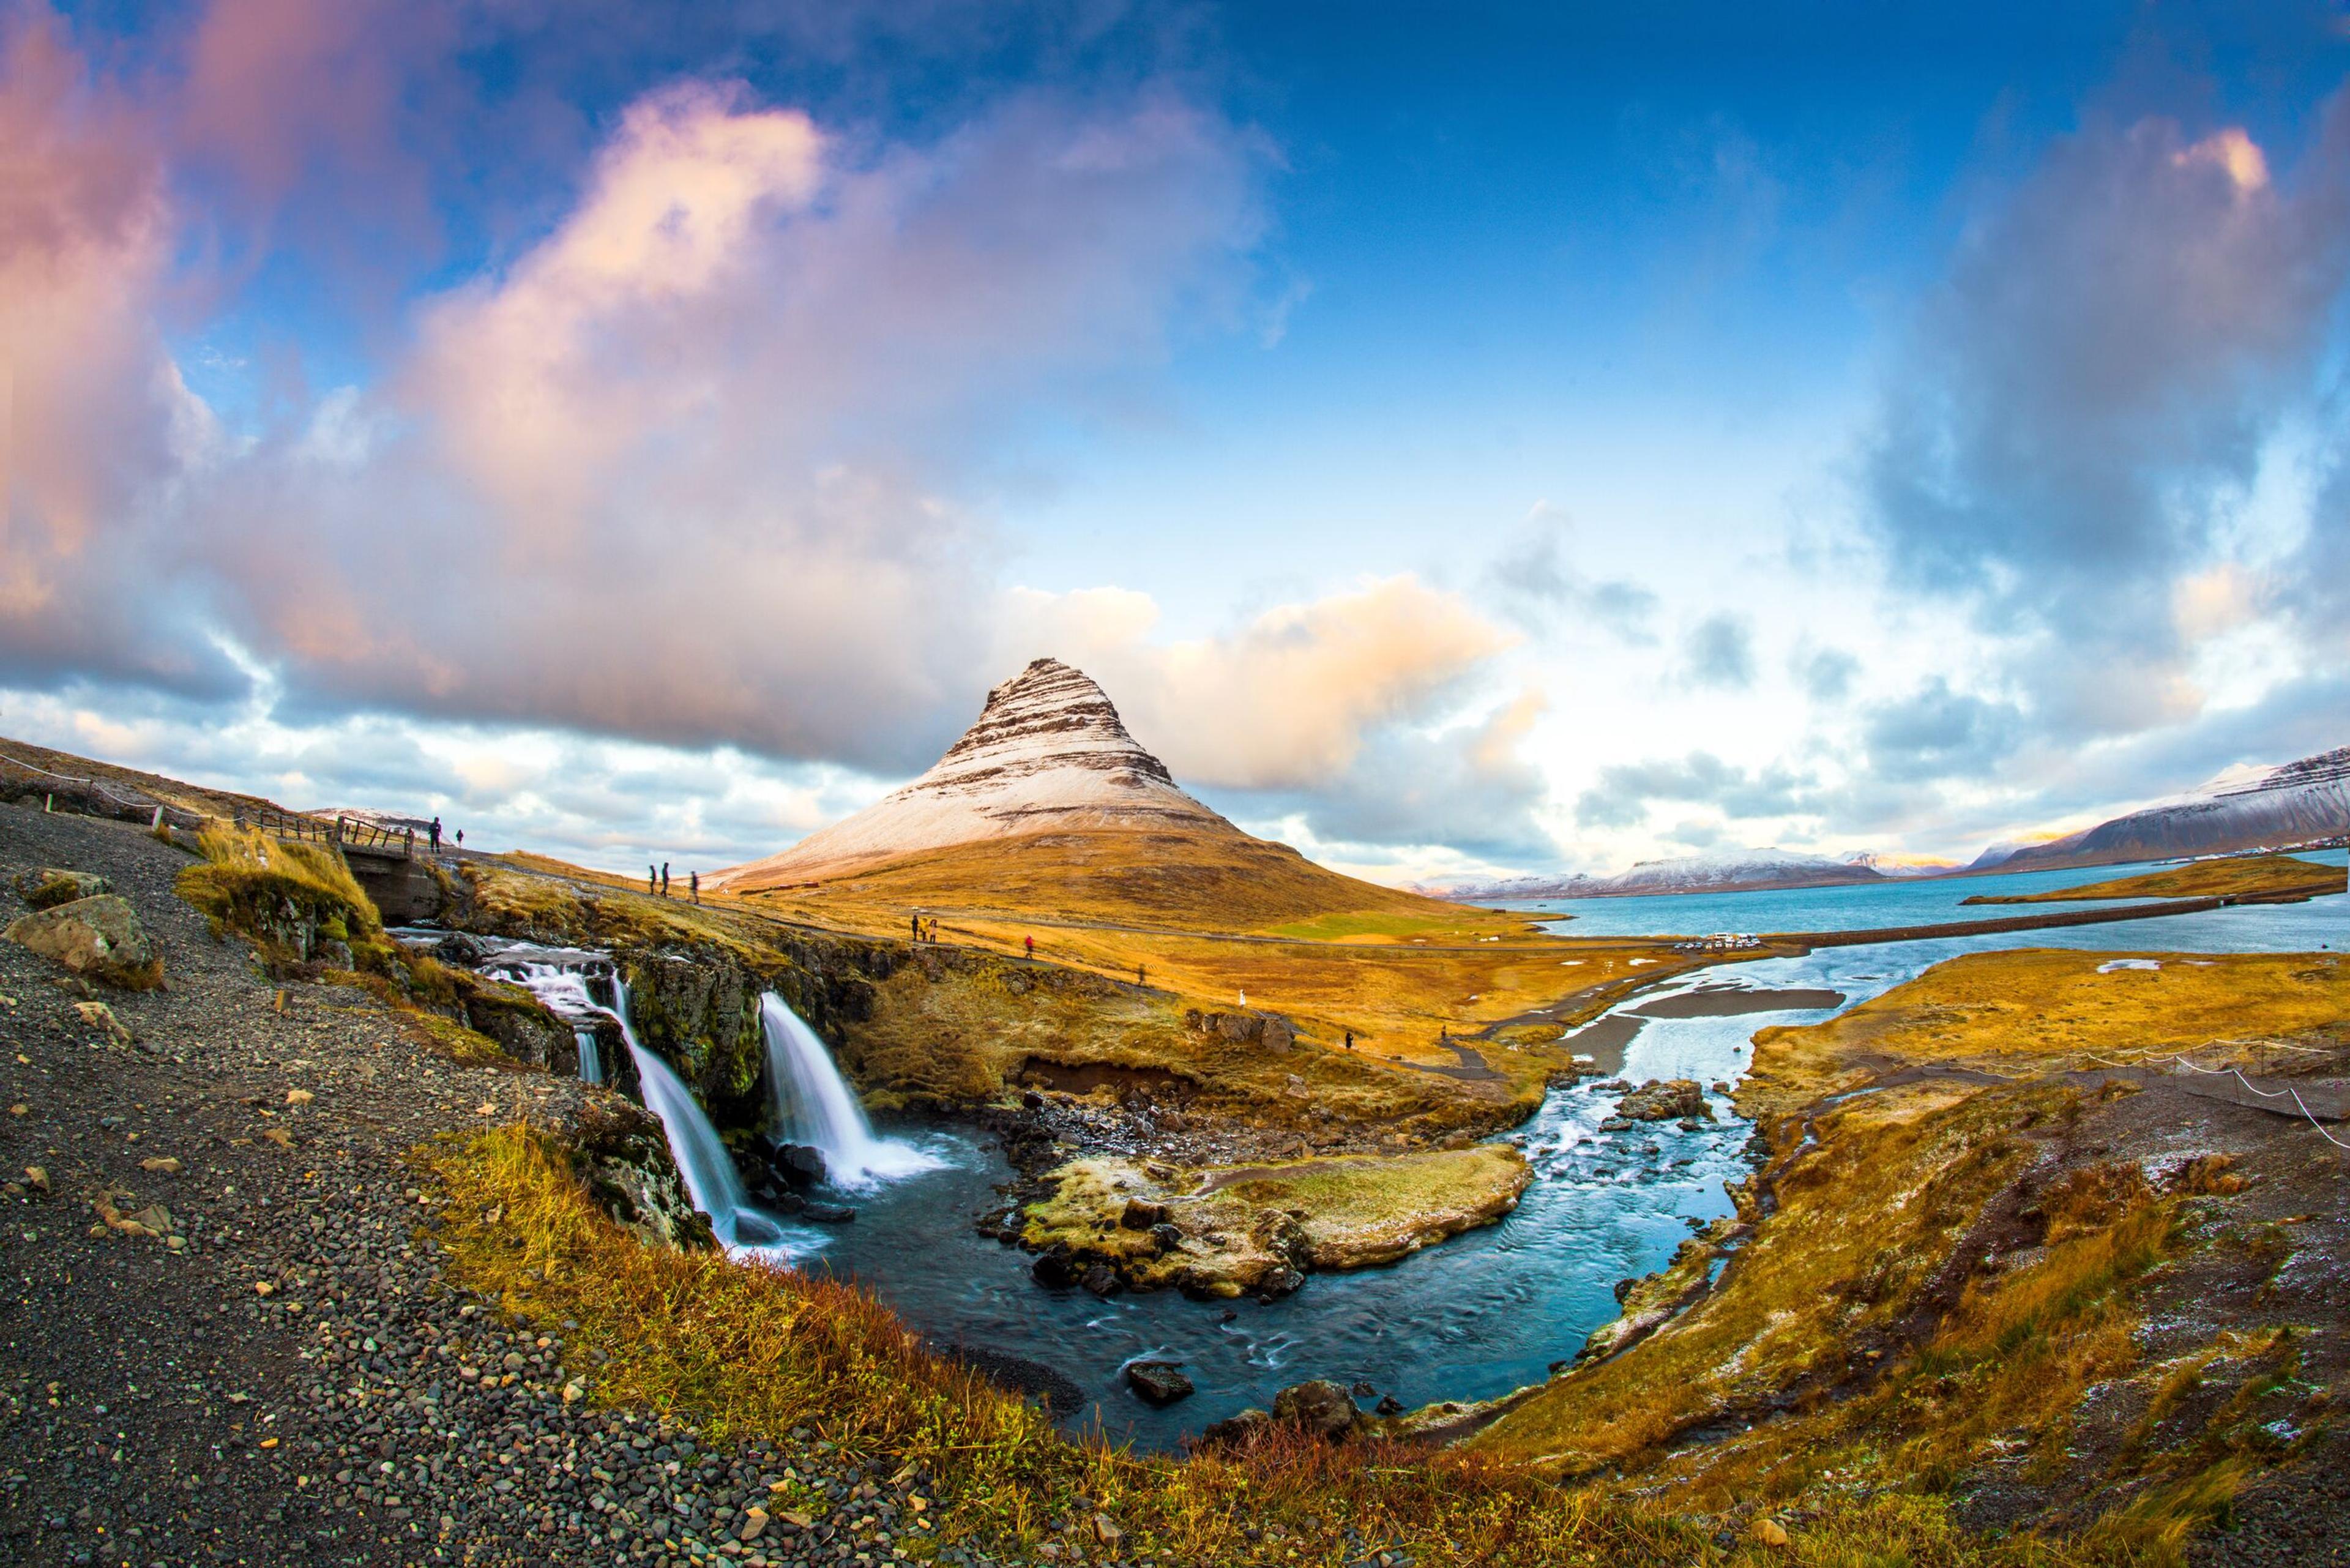 Kirkjufell, the iconic mountain of the Snæfellsnes peninsula, adorned with a delicate blanket of snow contrasting with the surrounding yellow-brown grass